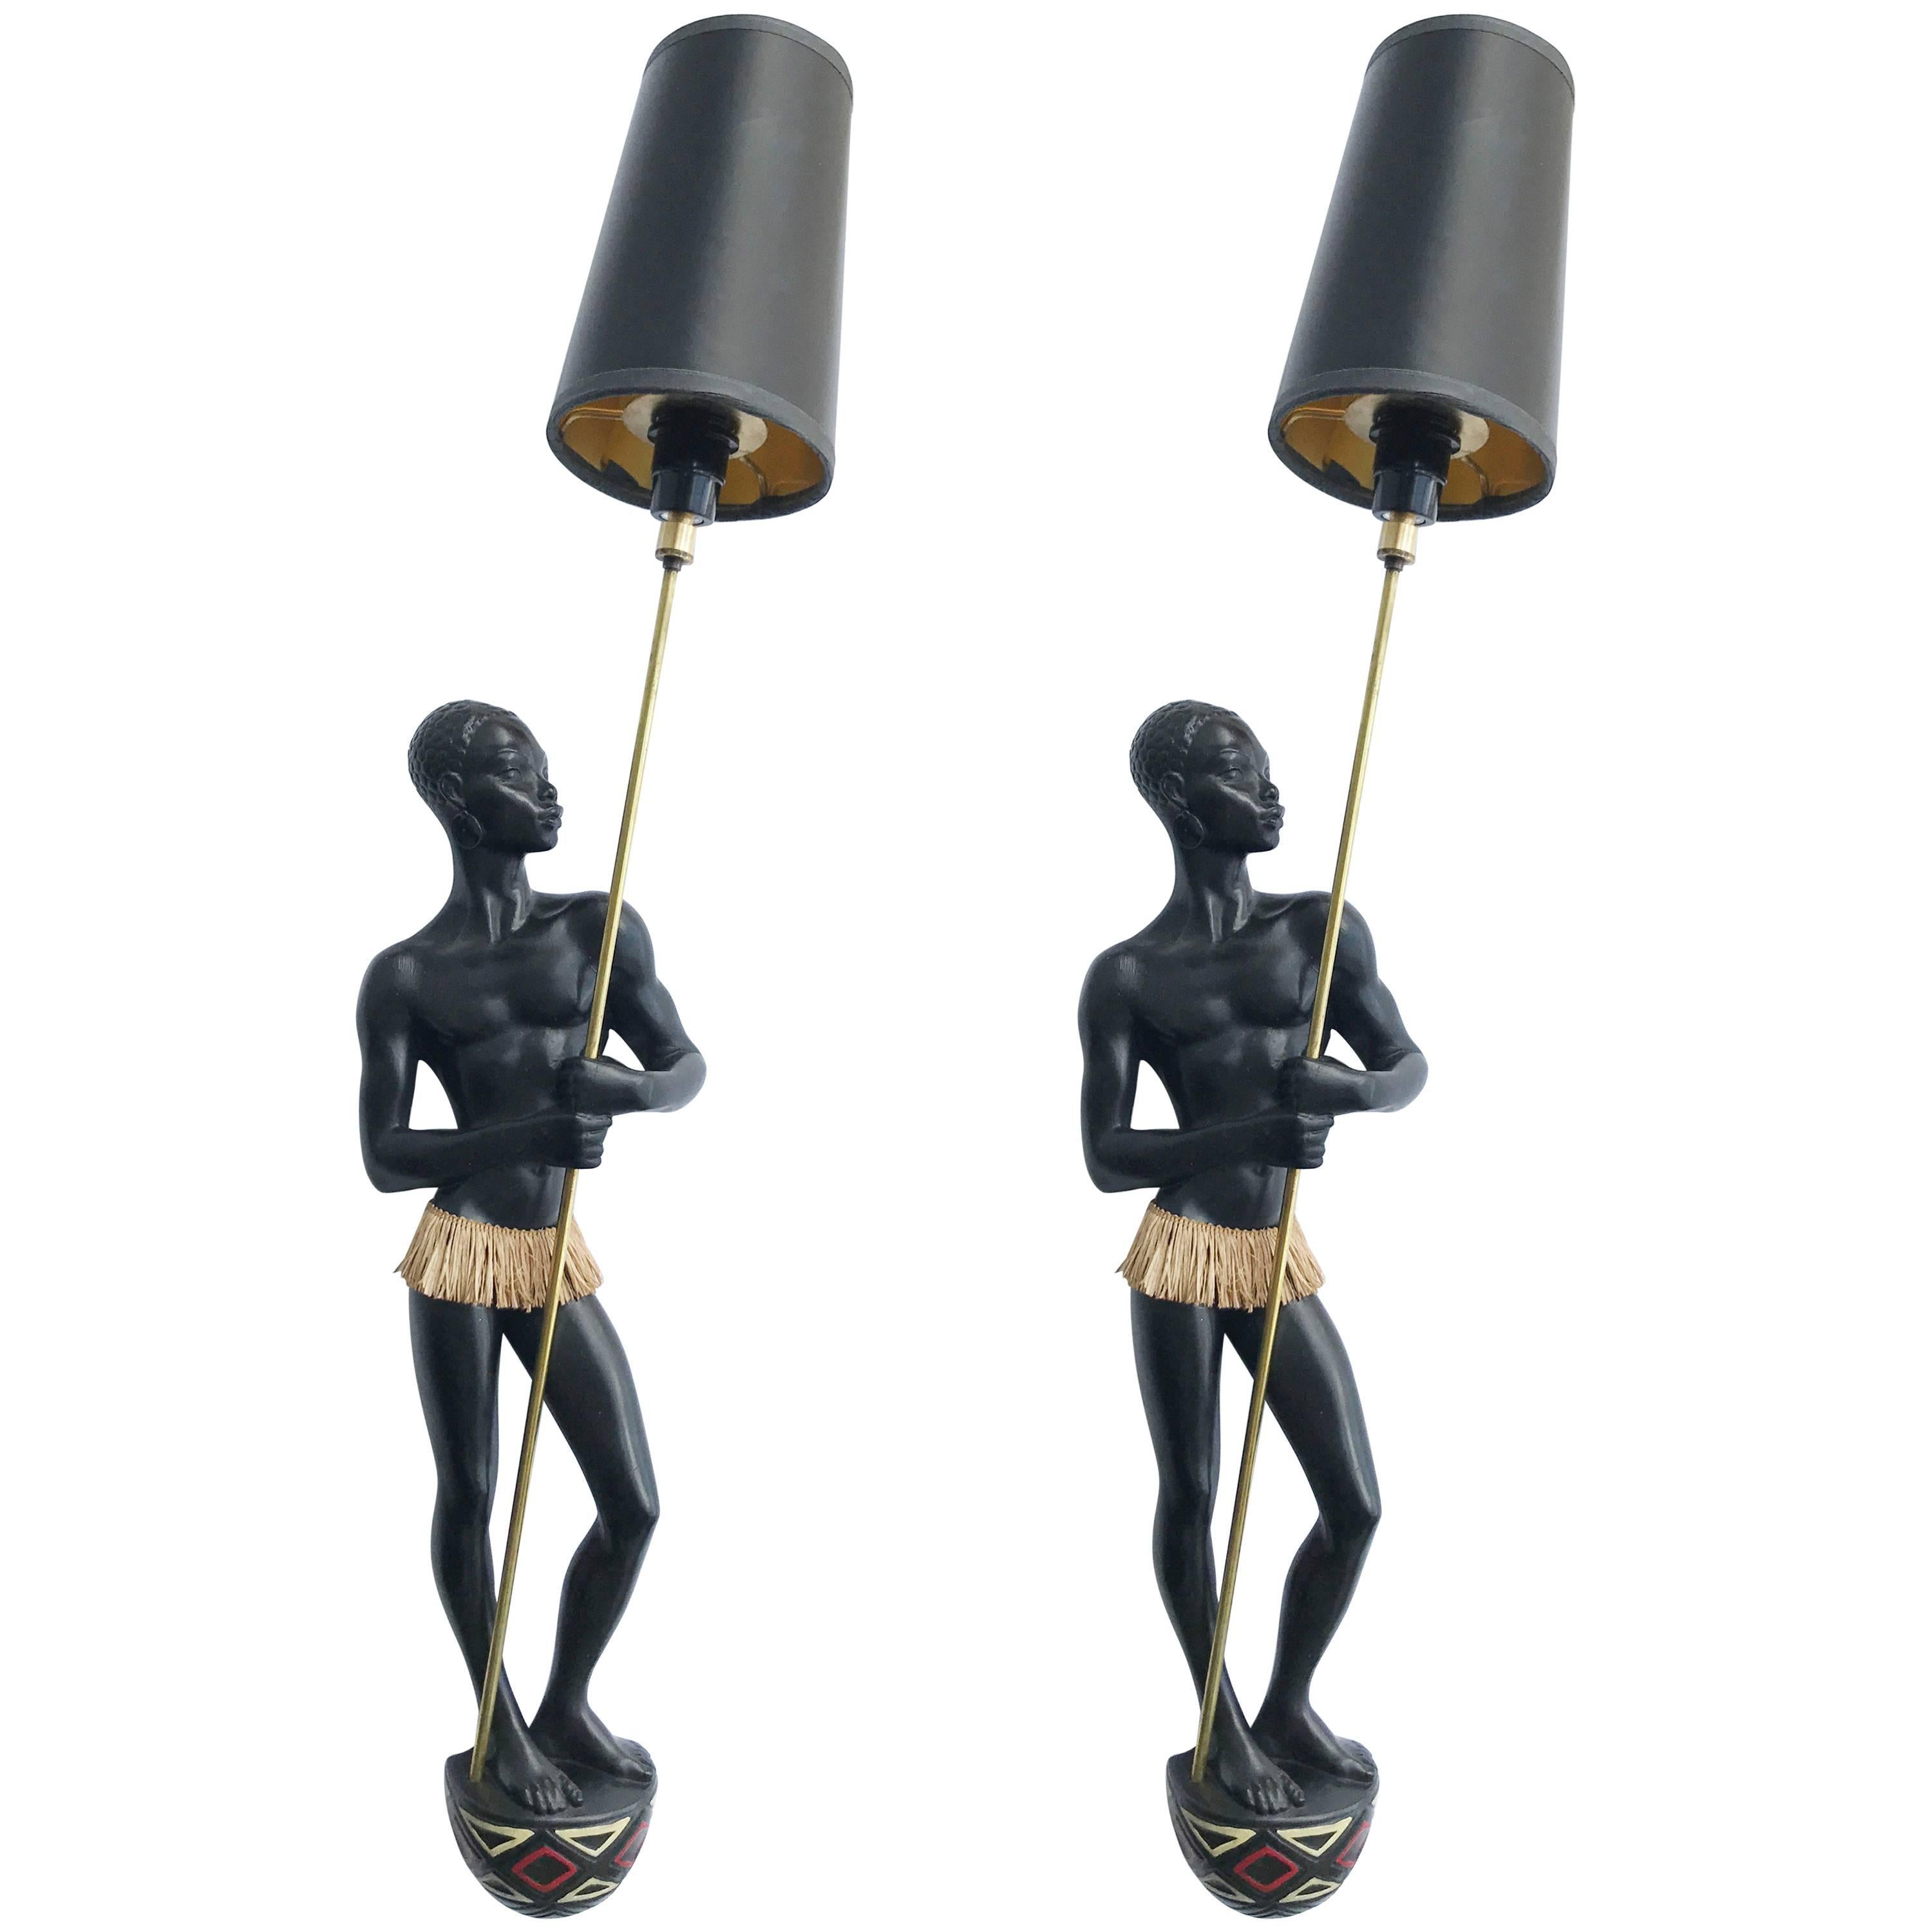  Circa 1950s Pair of Andre Carli Sconces For Sale